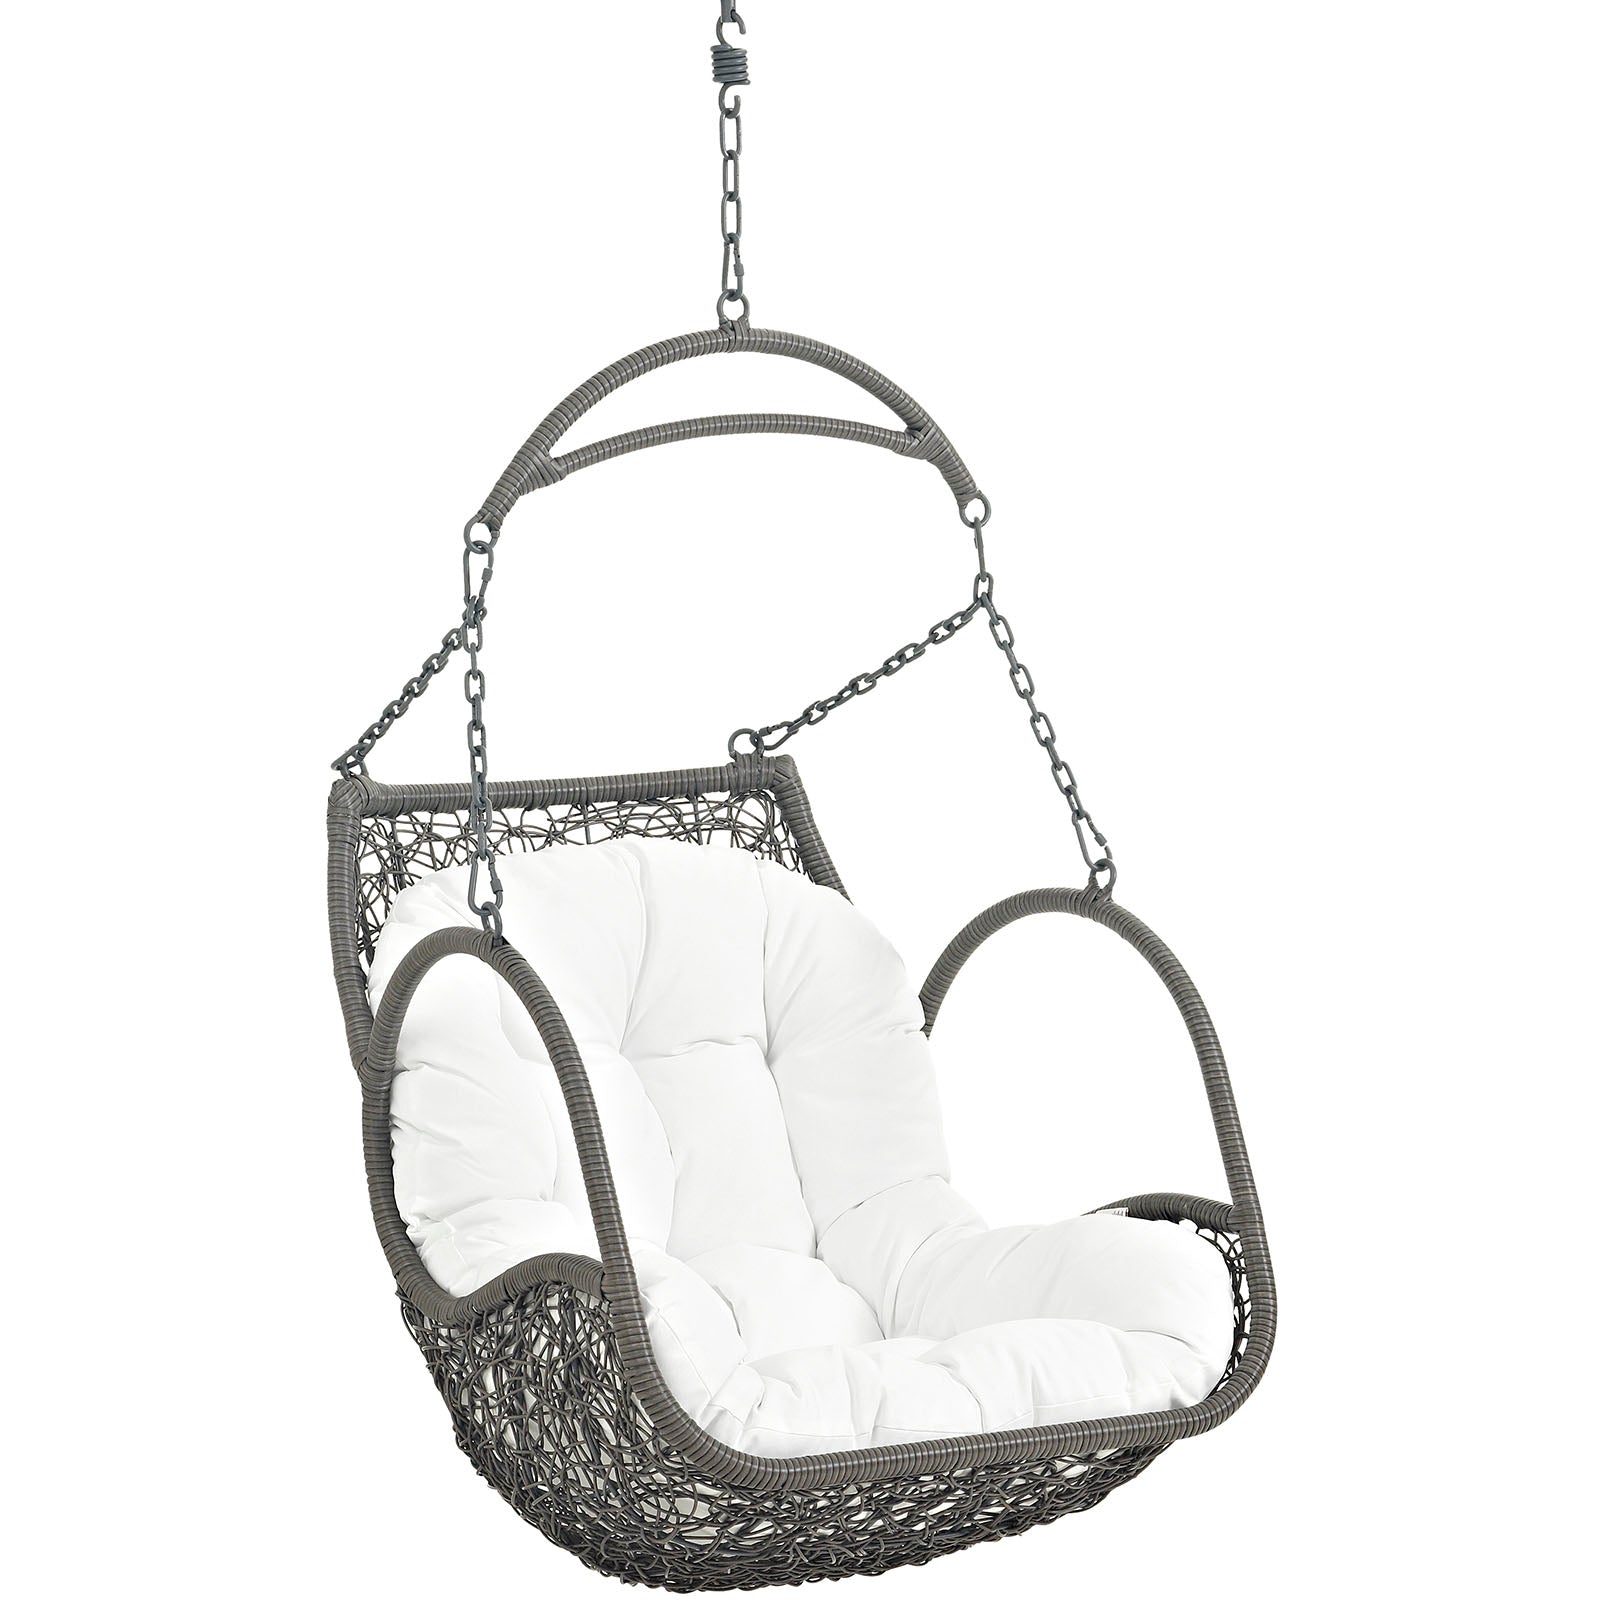 Arbor Outdoor Patio Wood Swing Chair - East Shore Modern Home Furnishings